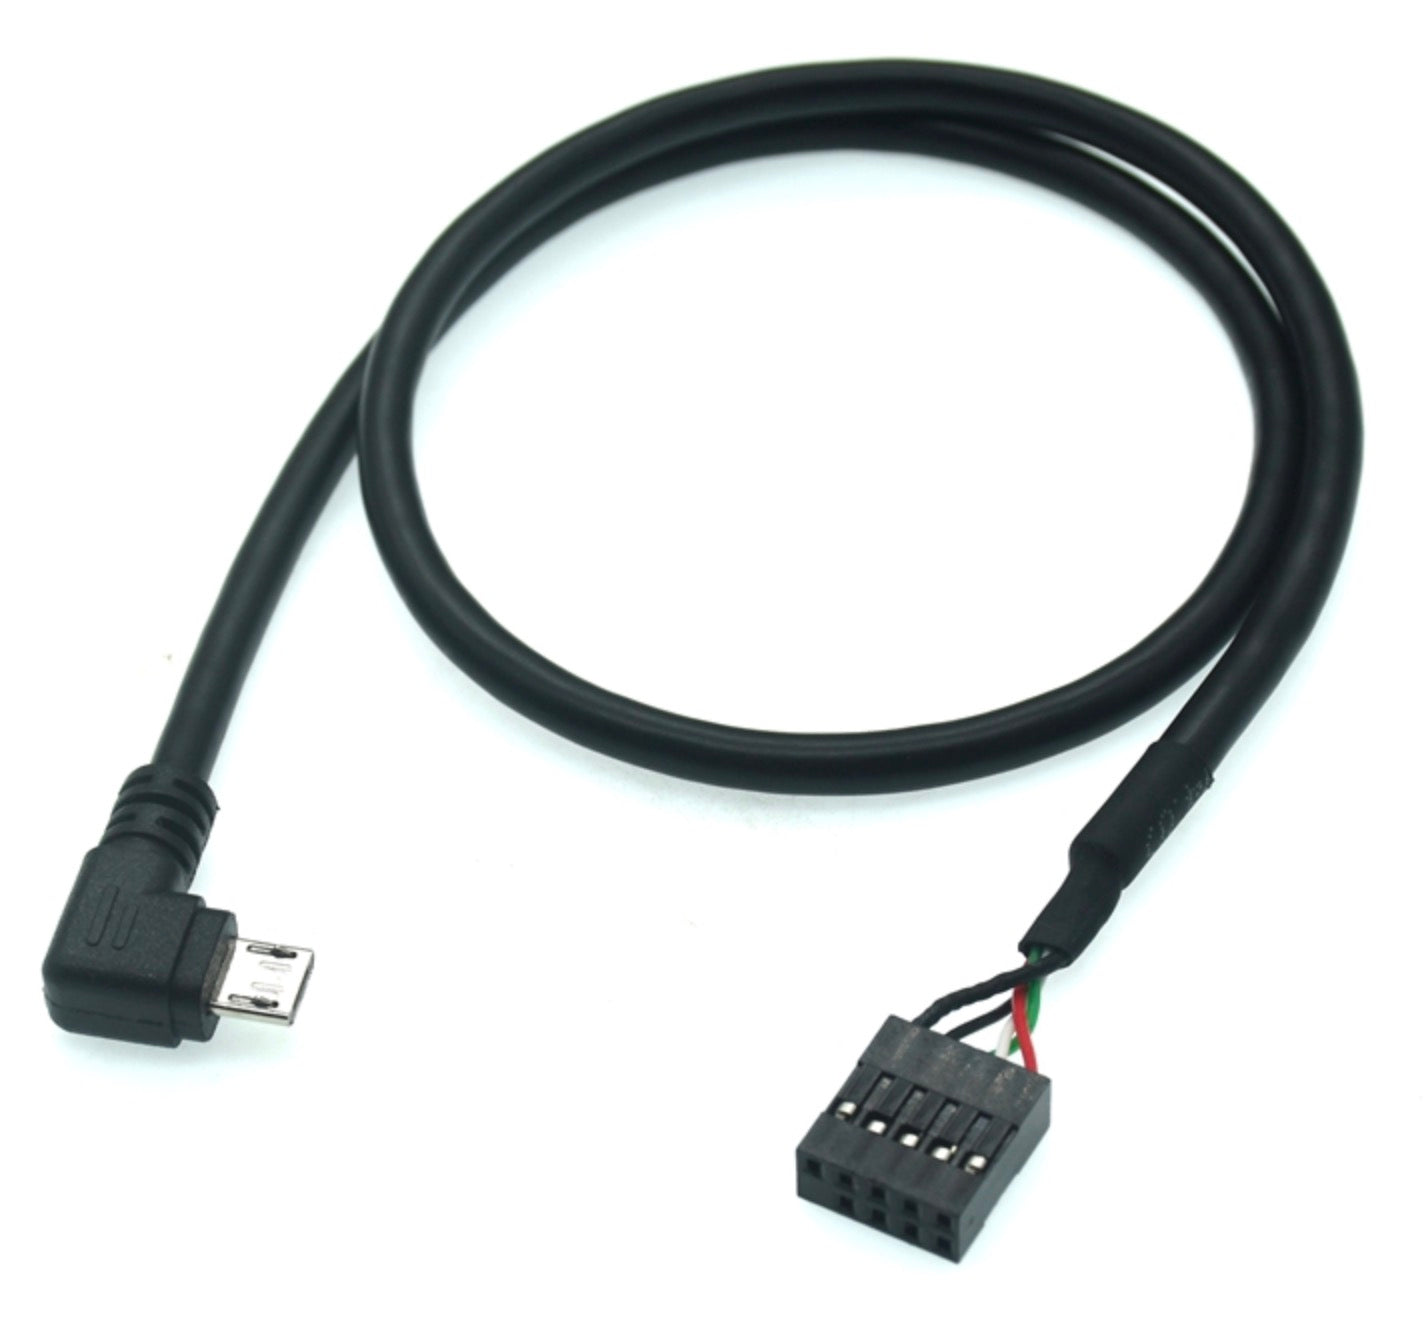 Micro USB 5 Pin to 5 Pin Motherboard Female Dupont Cable 0.5m